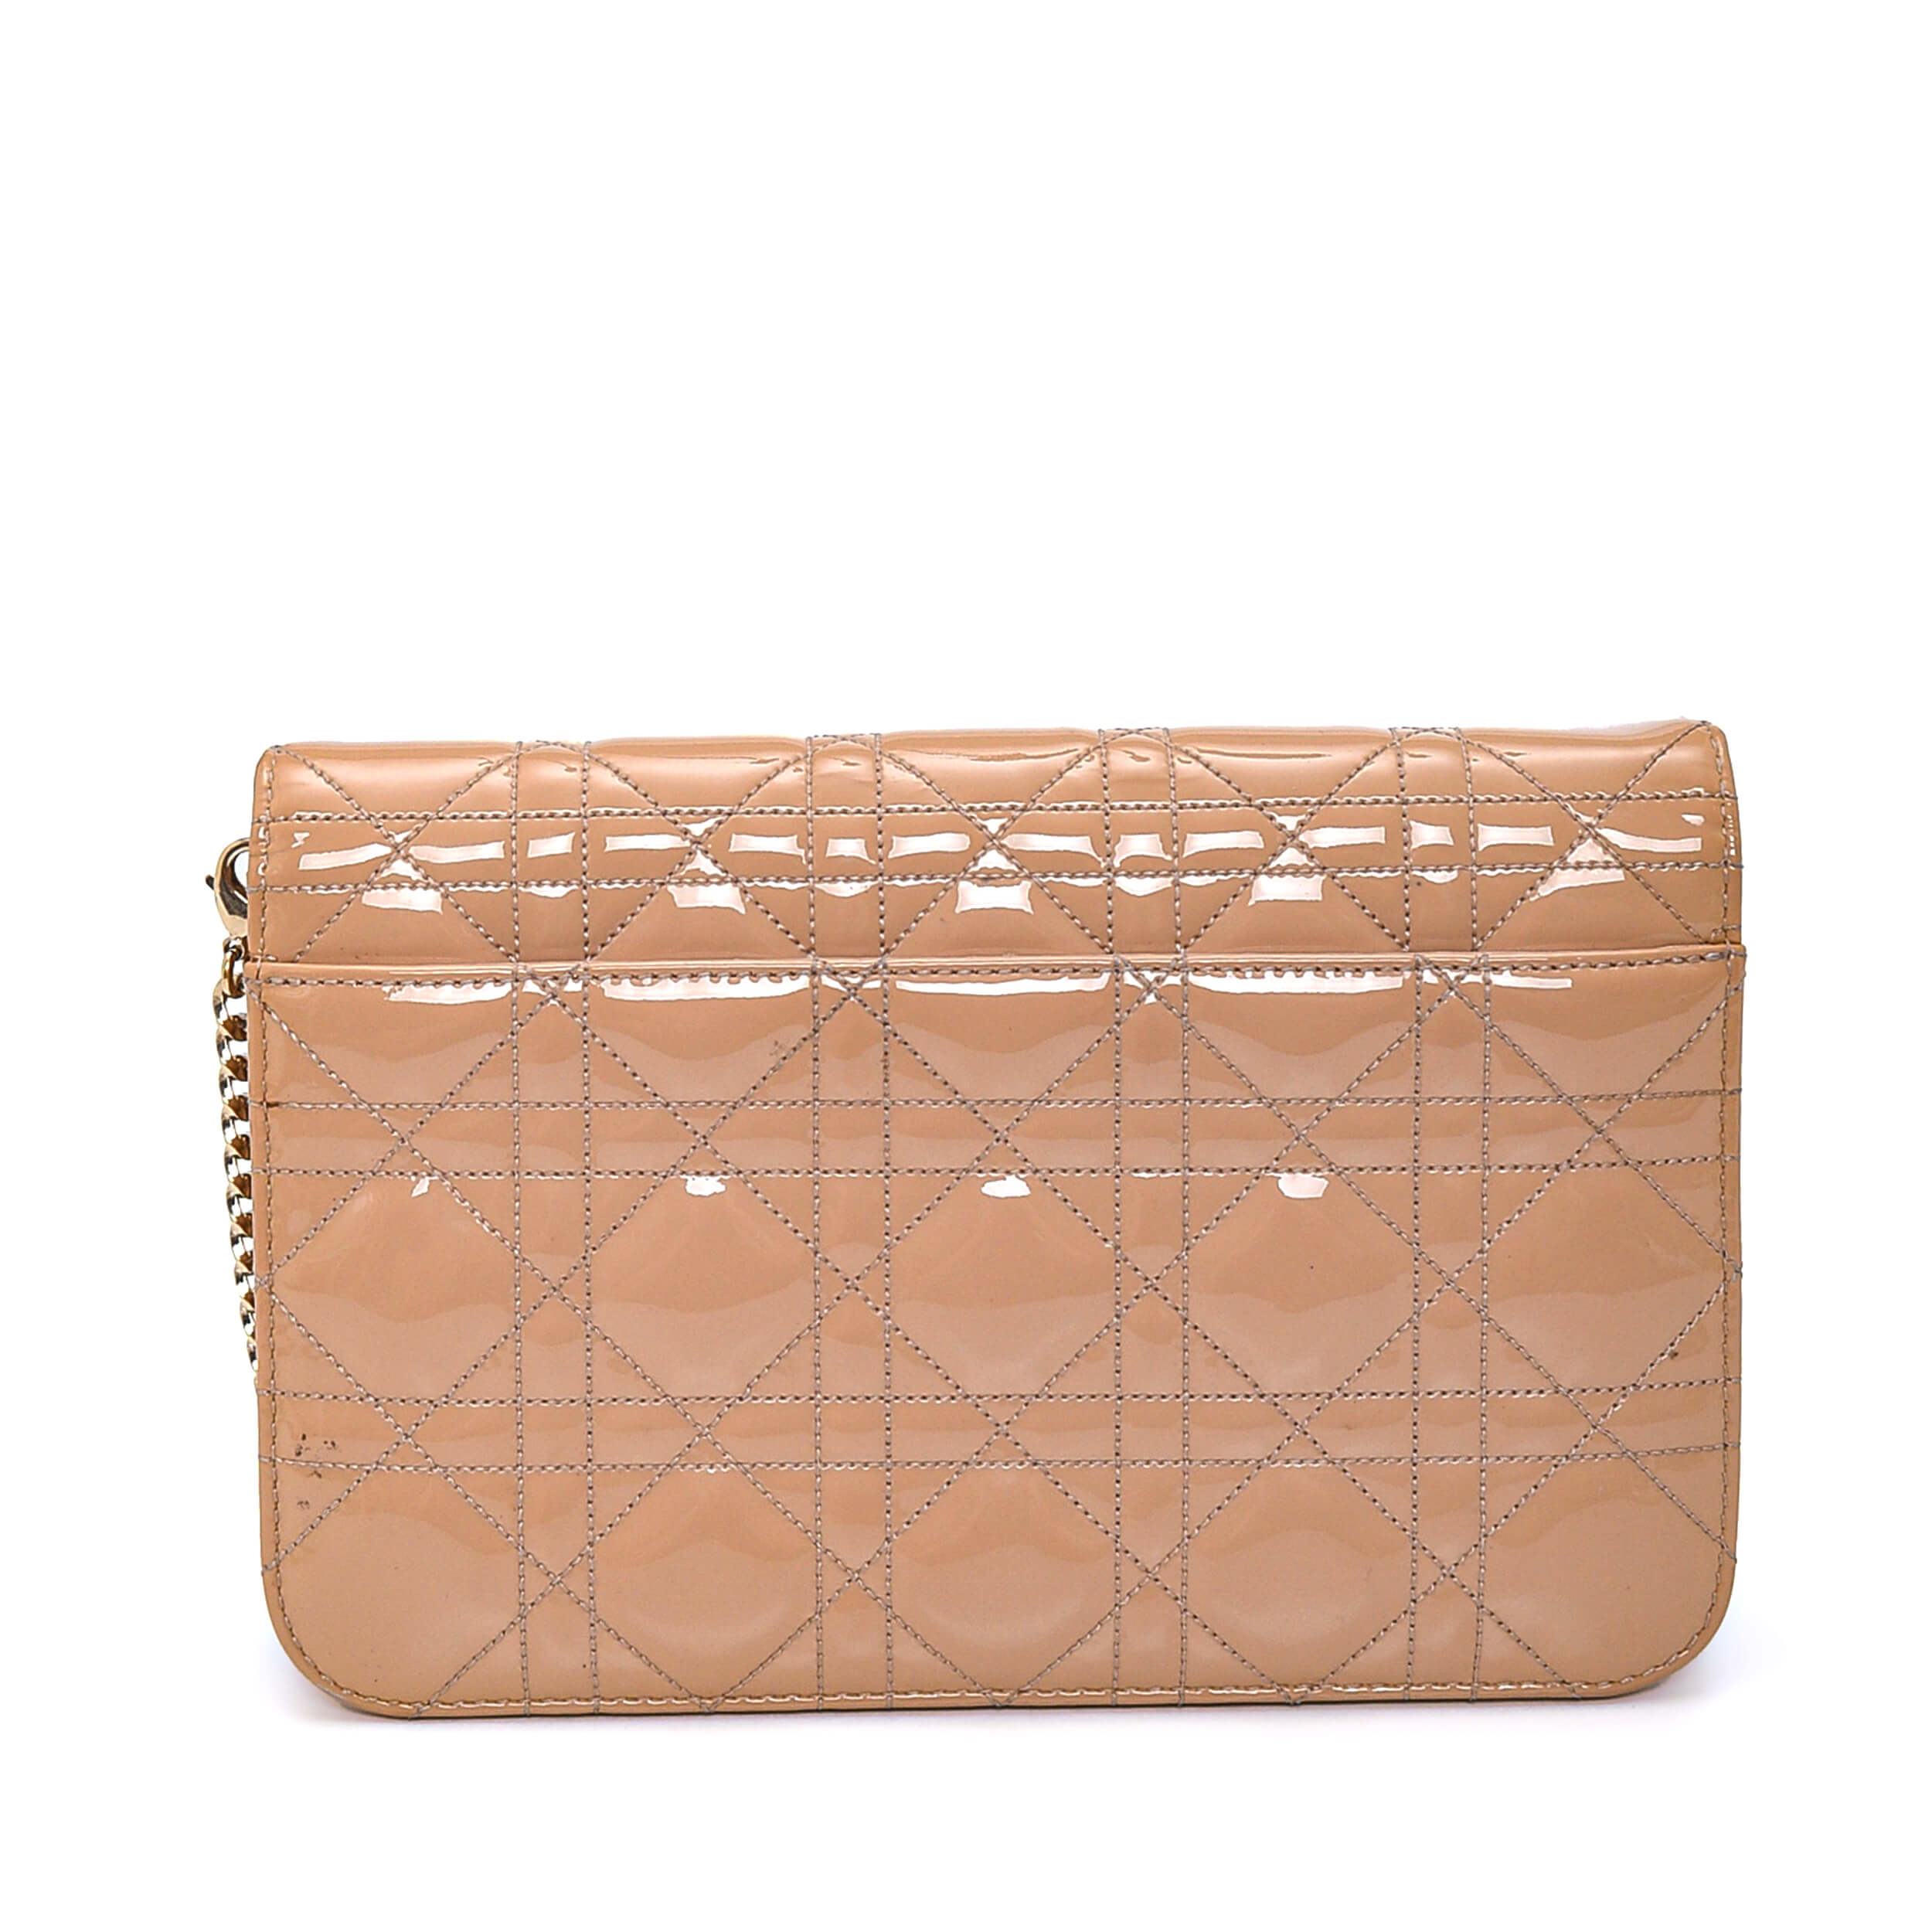 Christian Dior - Beige Cannage Patent Leather Crossbody